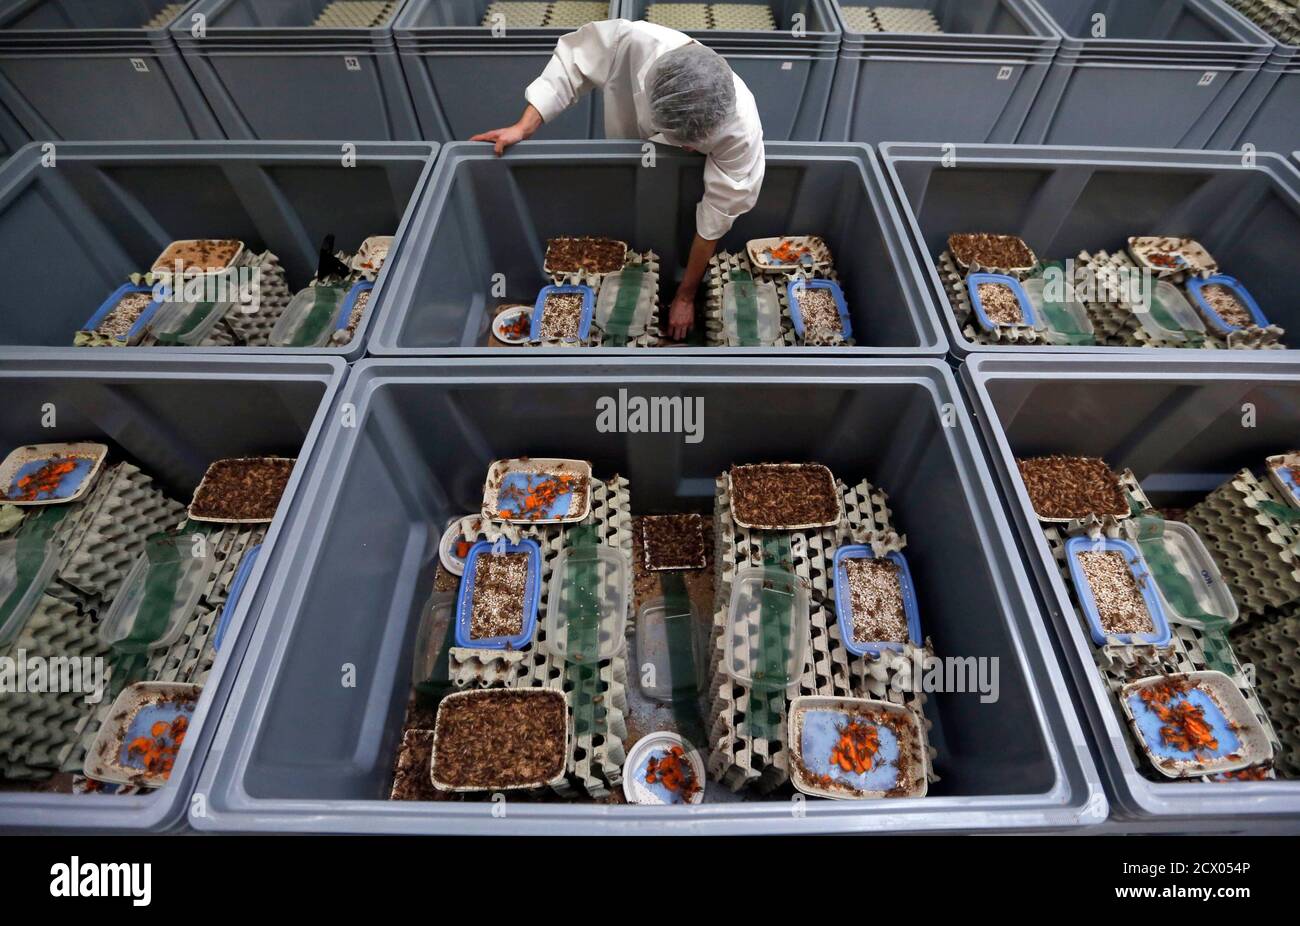 An employee inspects crickets at the Micronutris plant in Saint Orens de Gameville, southwestern France, February 24, 2014. According to Micronutris, the company is the only firm in Europe that raises insects for human consumption. The insects are sold live, dehydrated or rendered into a flour-like powder for use in pastries. REUTERS/Regis Duvignau (FRANCE - Tags: ANIMALS FOOD SOCIETY BUSINESS) Stock Photo